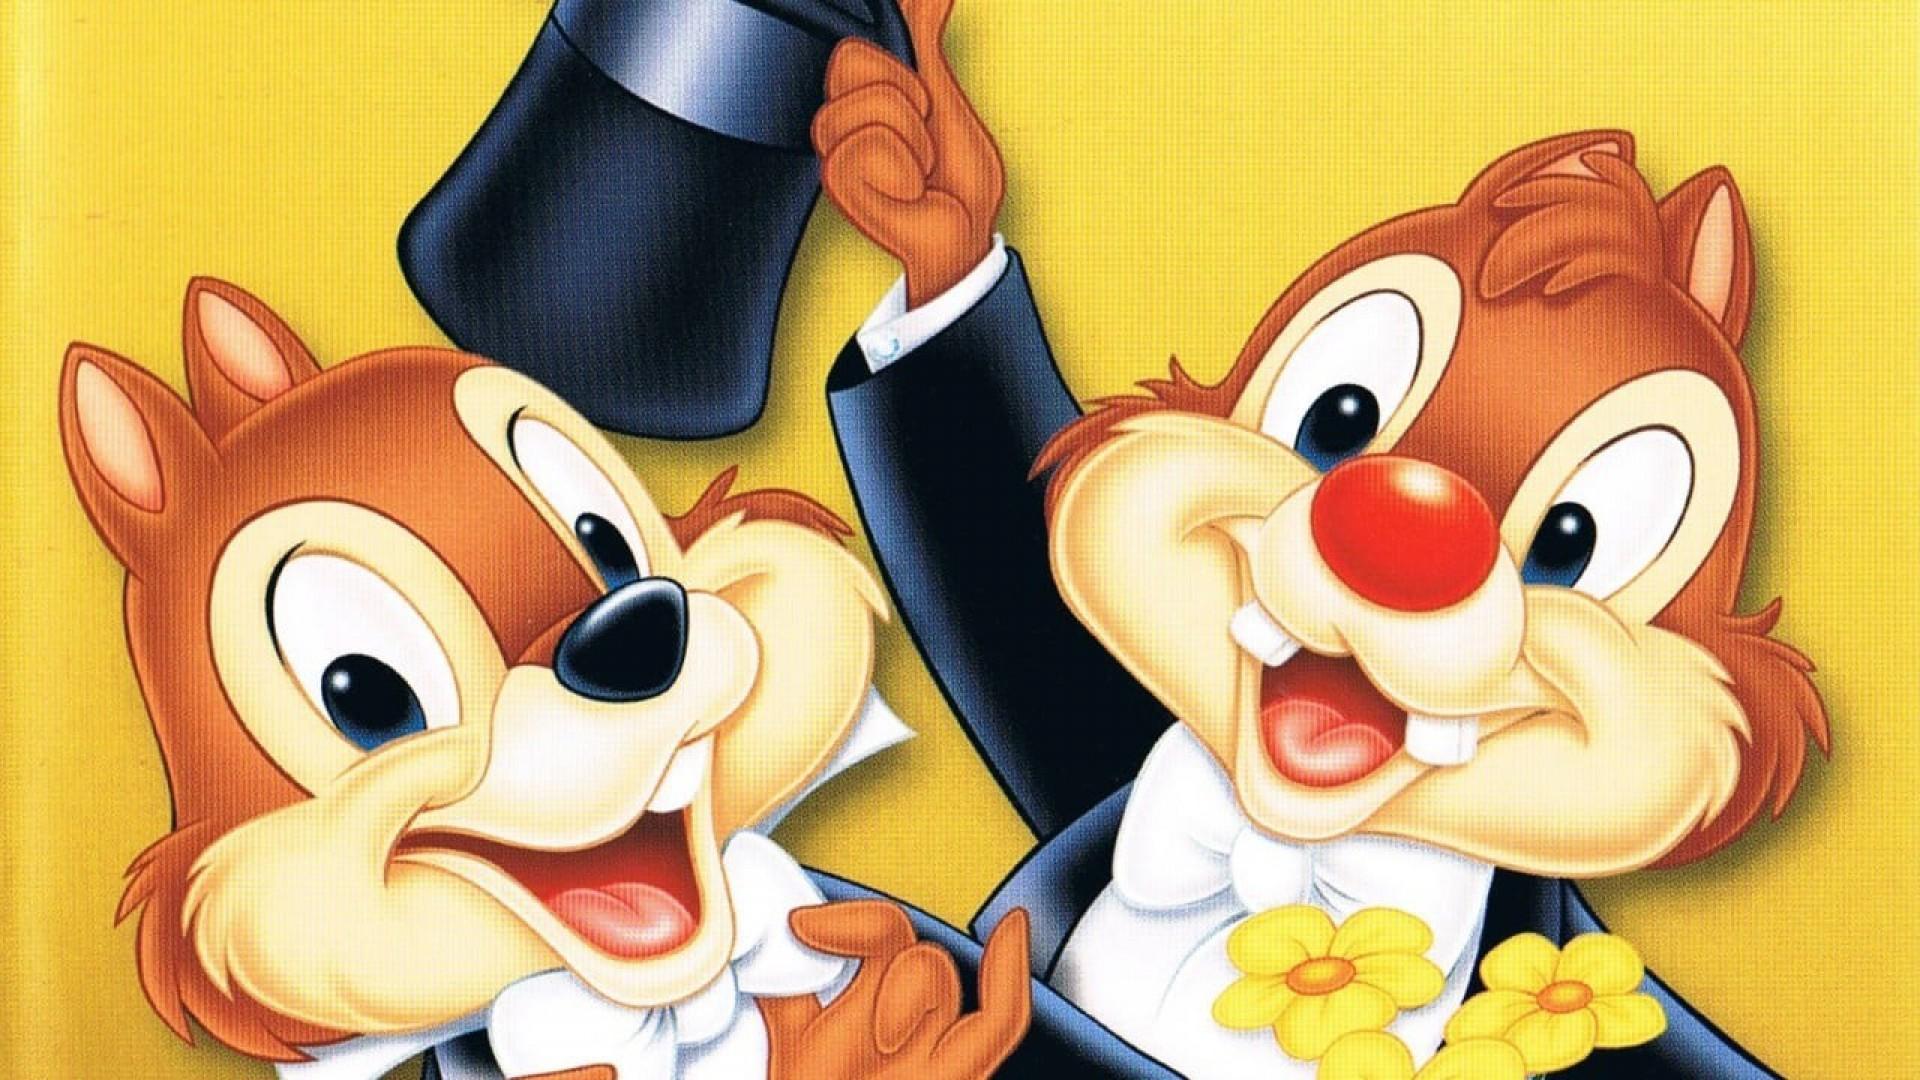 Chip 'n Dale: Here Comes Trouble